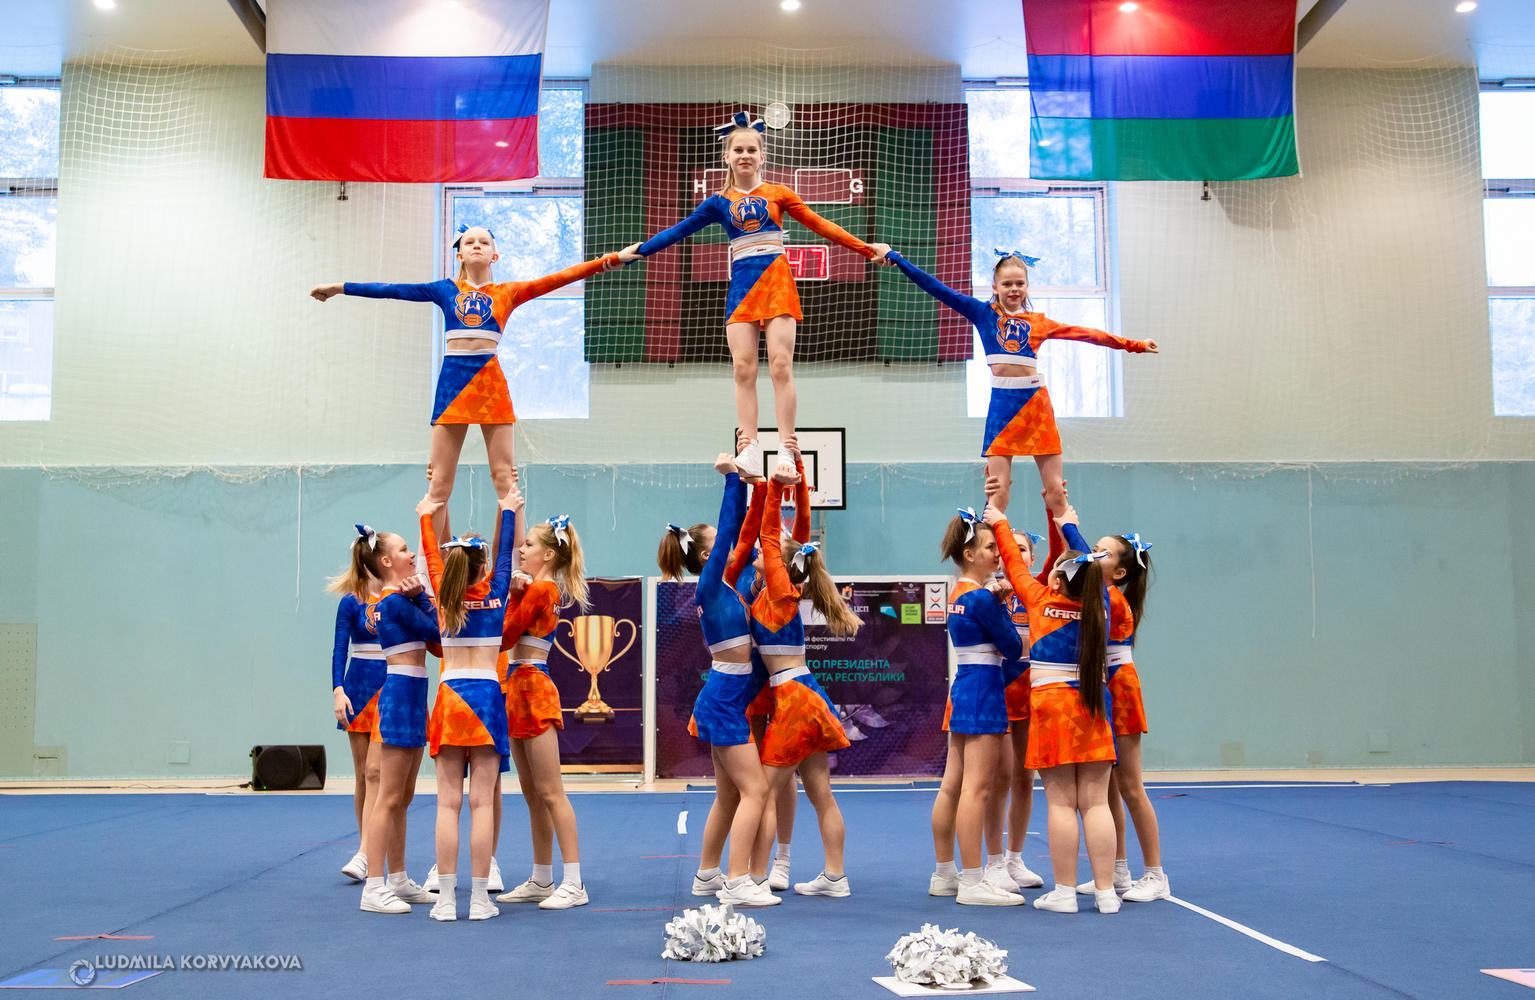 Chidleaders showed impressive training results at the sports festival in Karelia